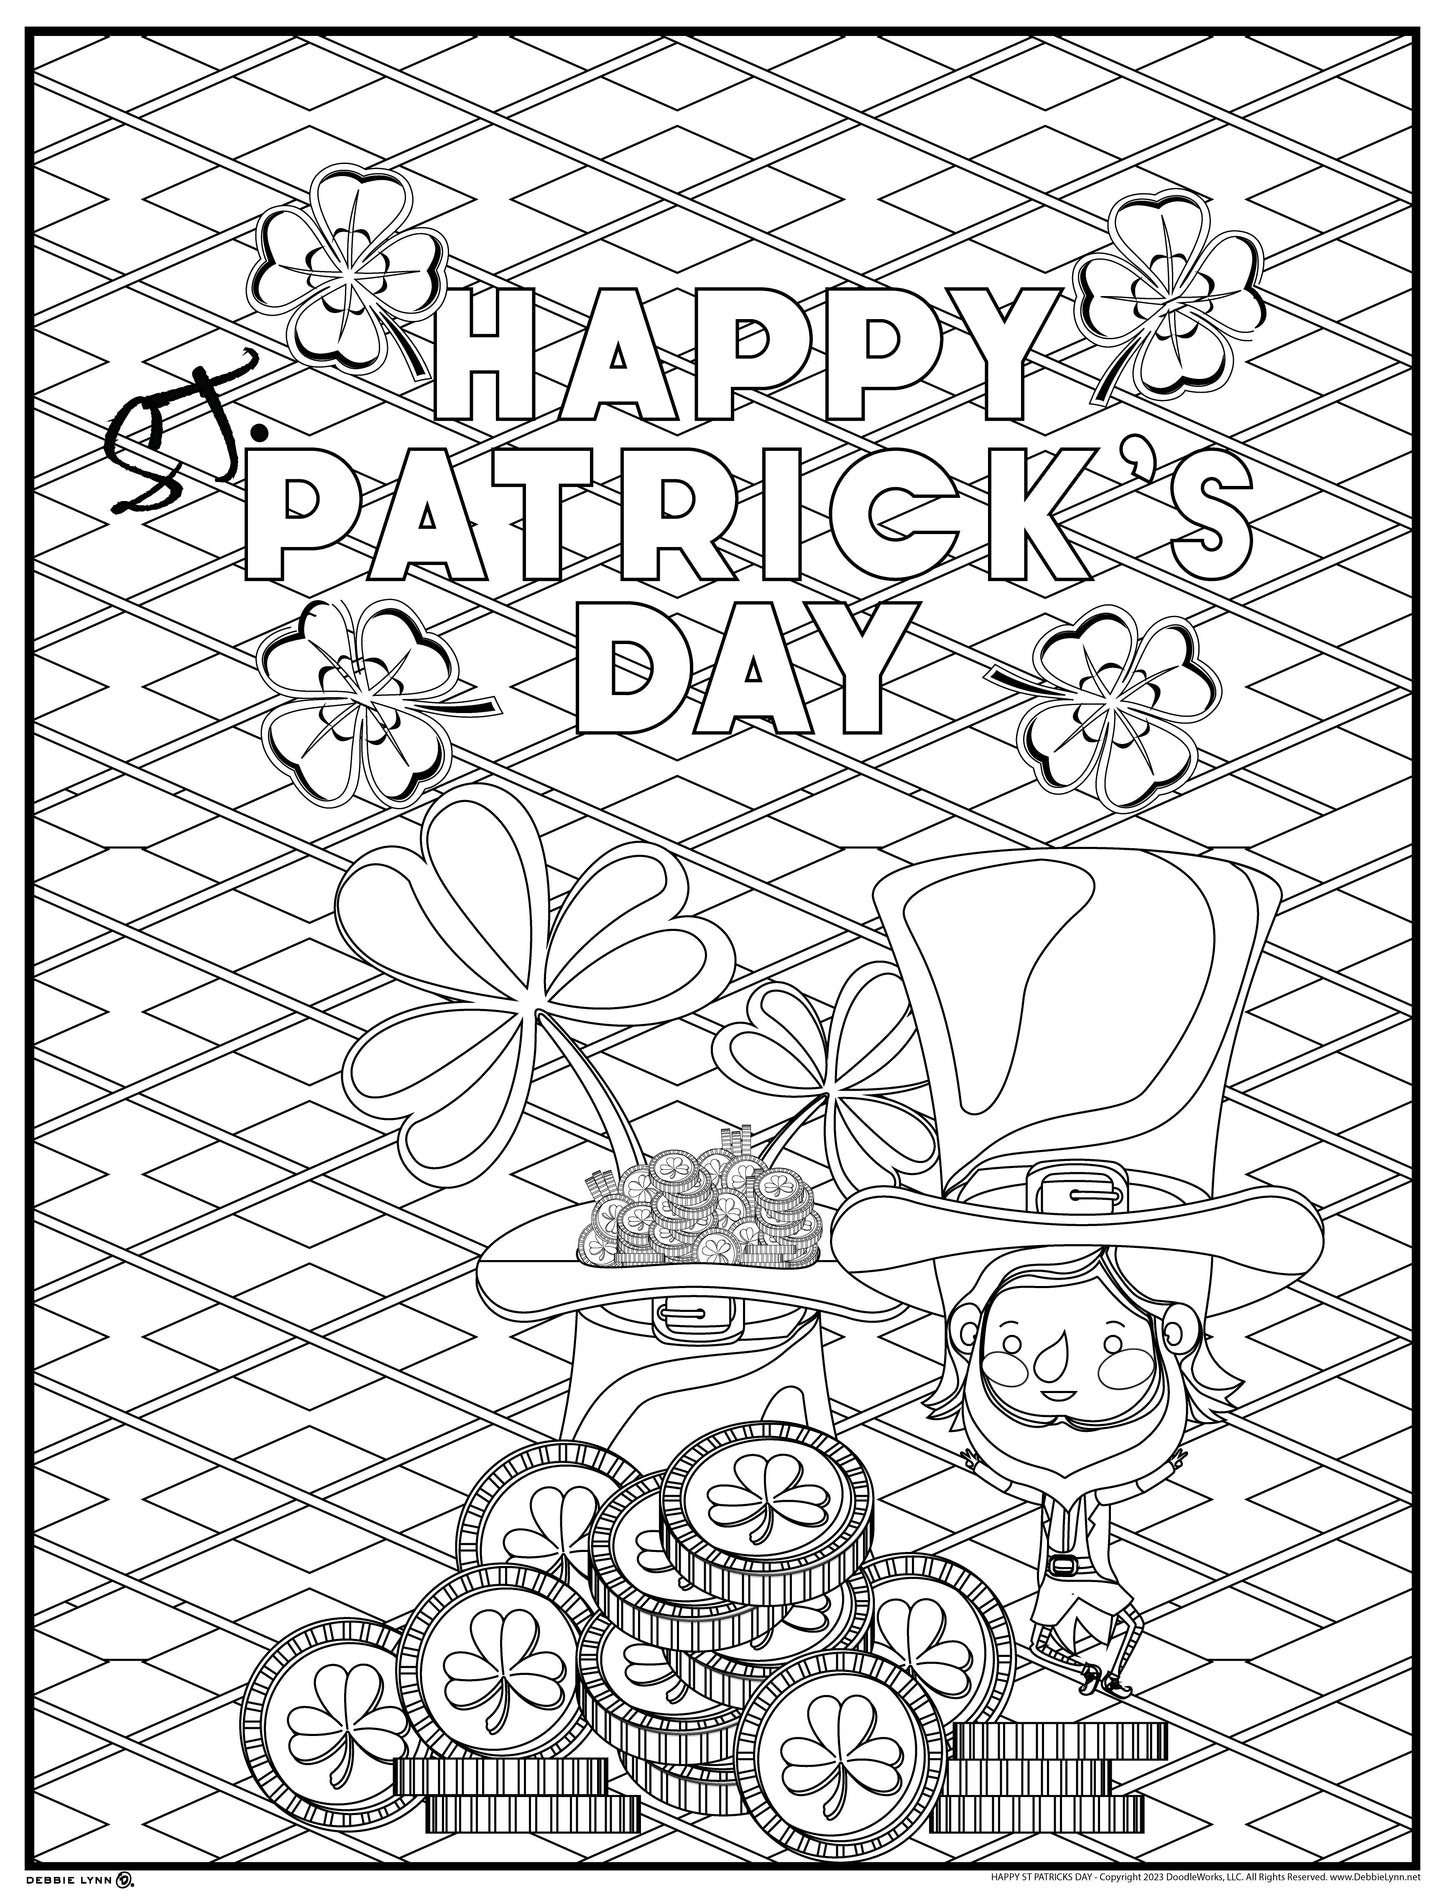 Happy St Patrick's Personalized Giant Coloring Poster 46"x60"